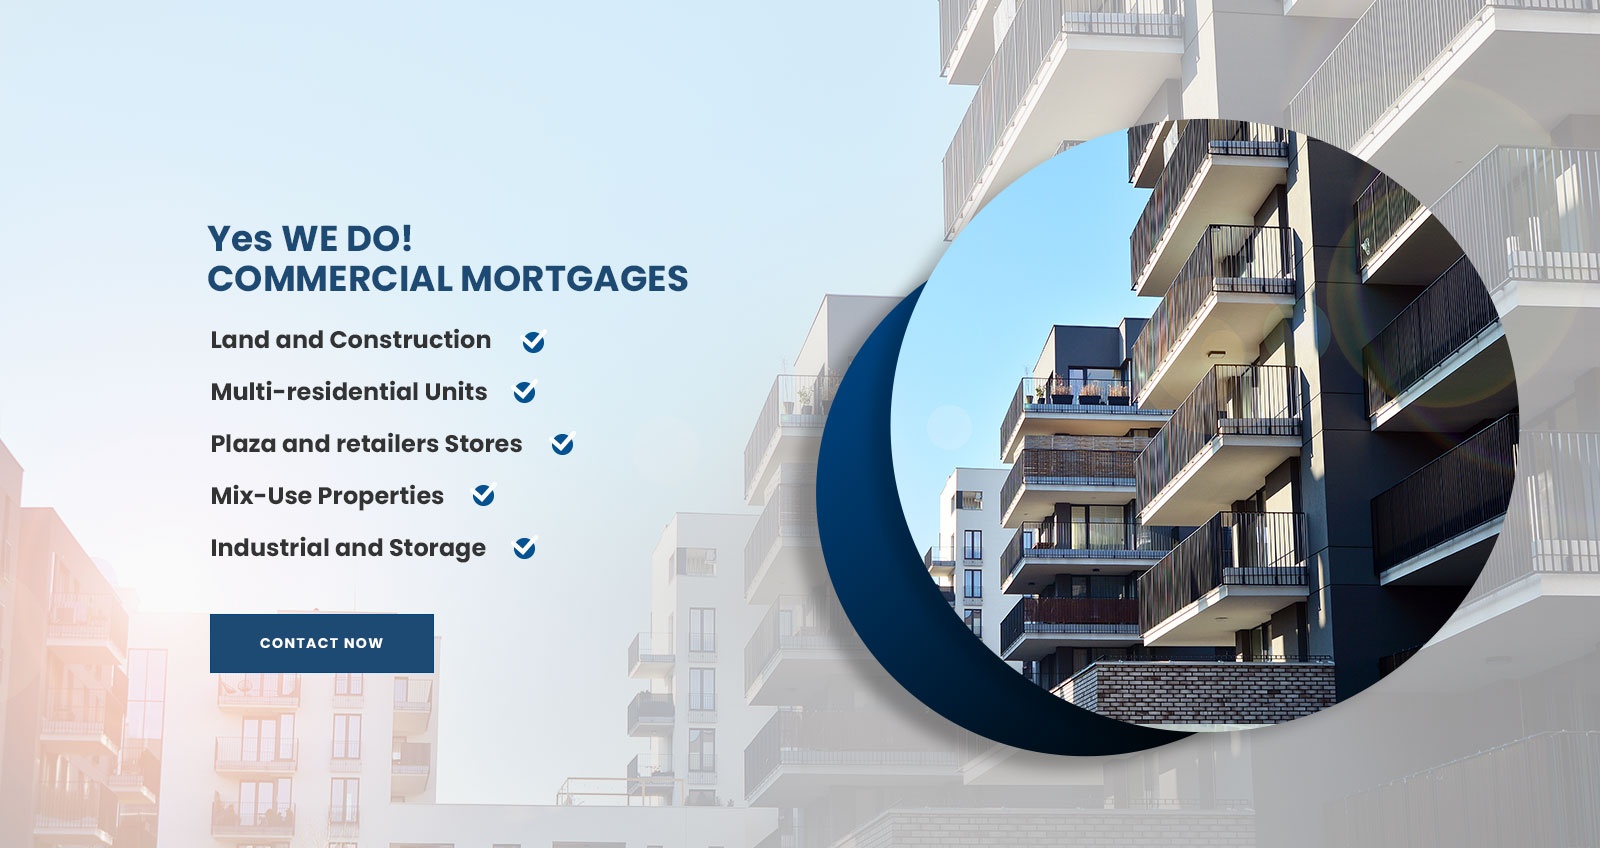 Get various financing options for investing in land, multi-residential units with our Commercial Mortgage Services GTA